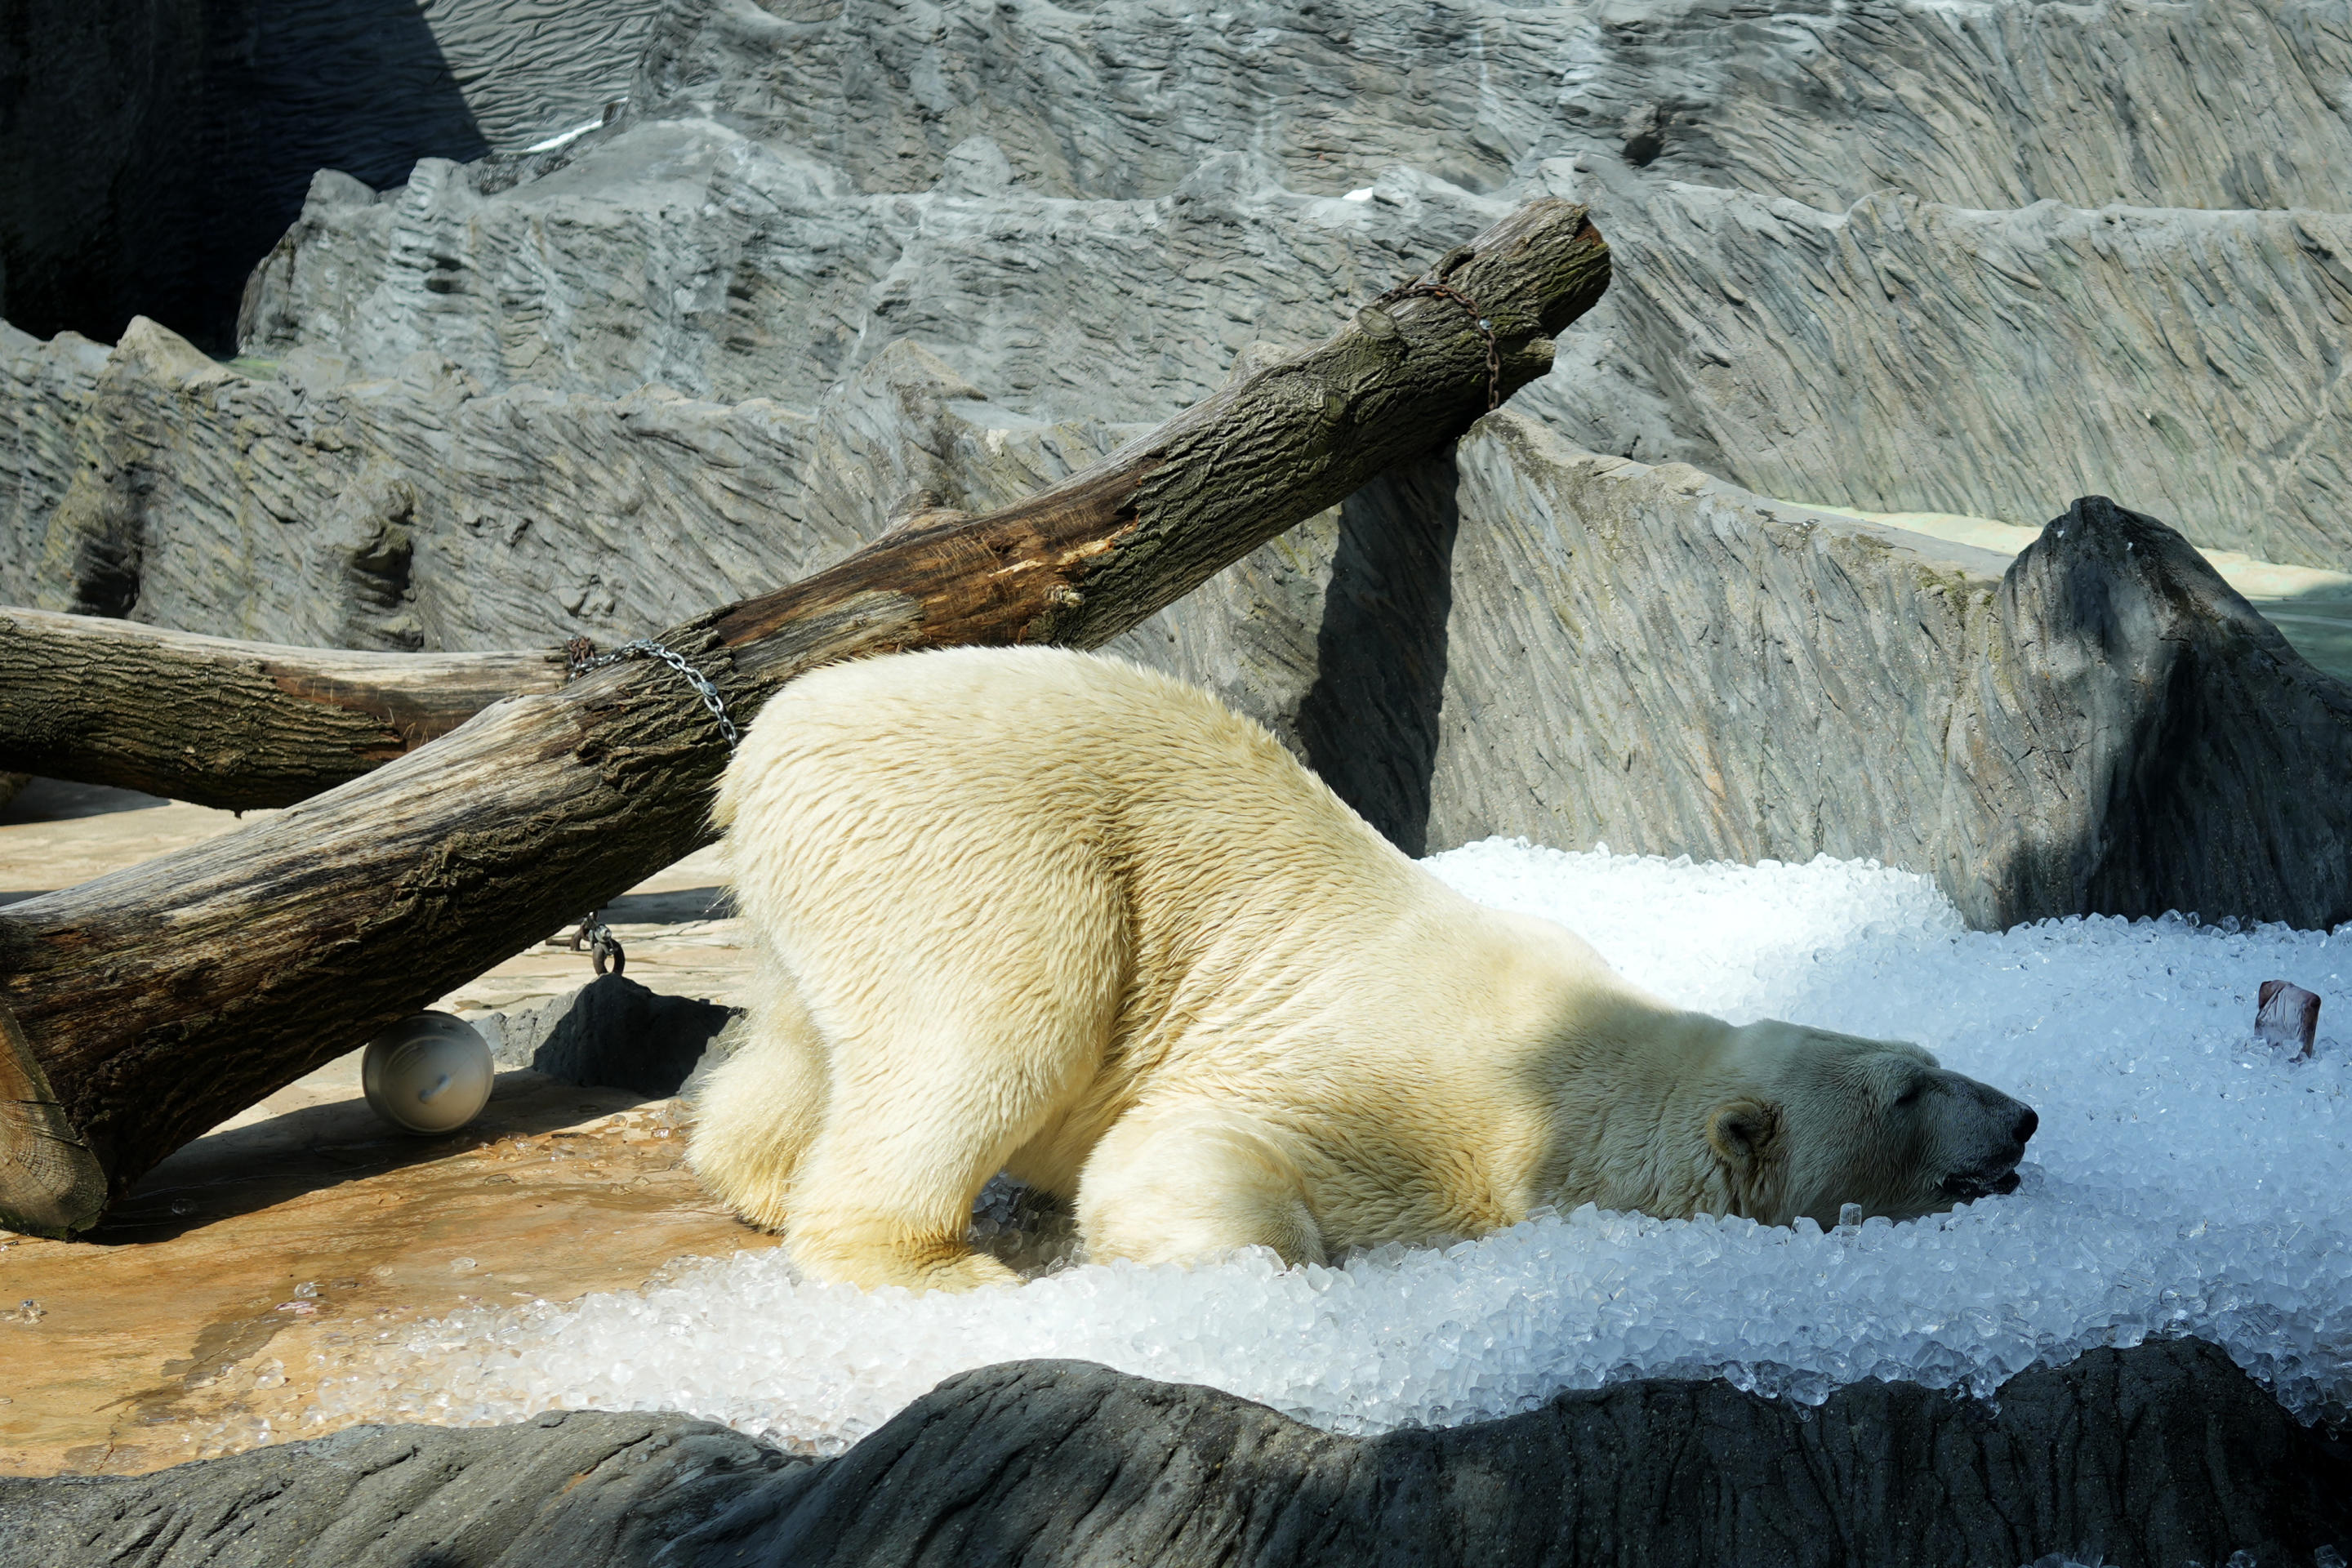 A polar bear rests its body in a large pile of ice that was brought to its enclosure at the zoo in Prague, Czech Republic.